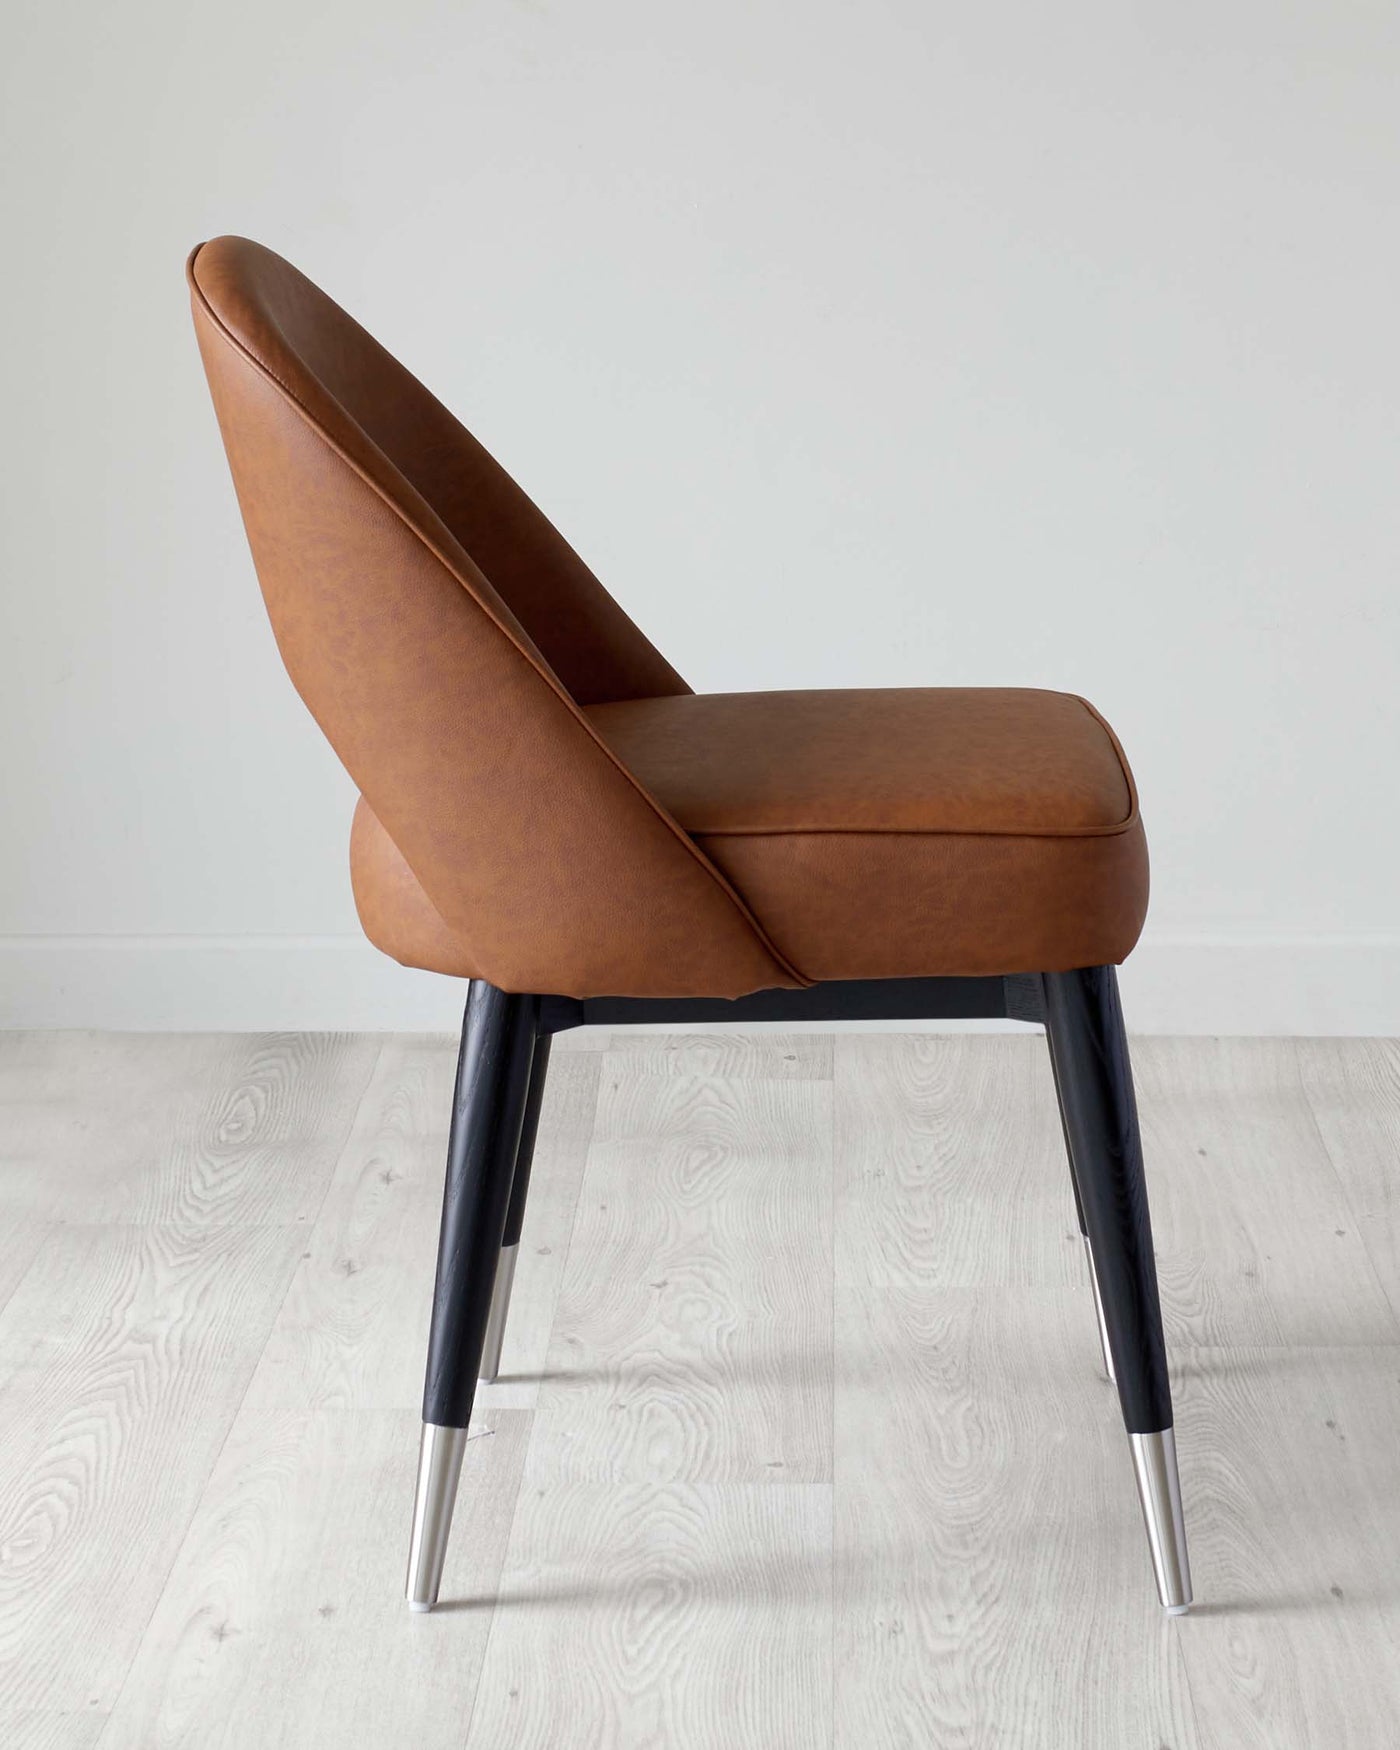 Modern chair with smooth camel-coloured leather upholstery and metal legs, two of which are visible, tapered with a glossy chrome finish. The chair has a curved backrest and a minimalist design, set against a light wooden floor and a white background.